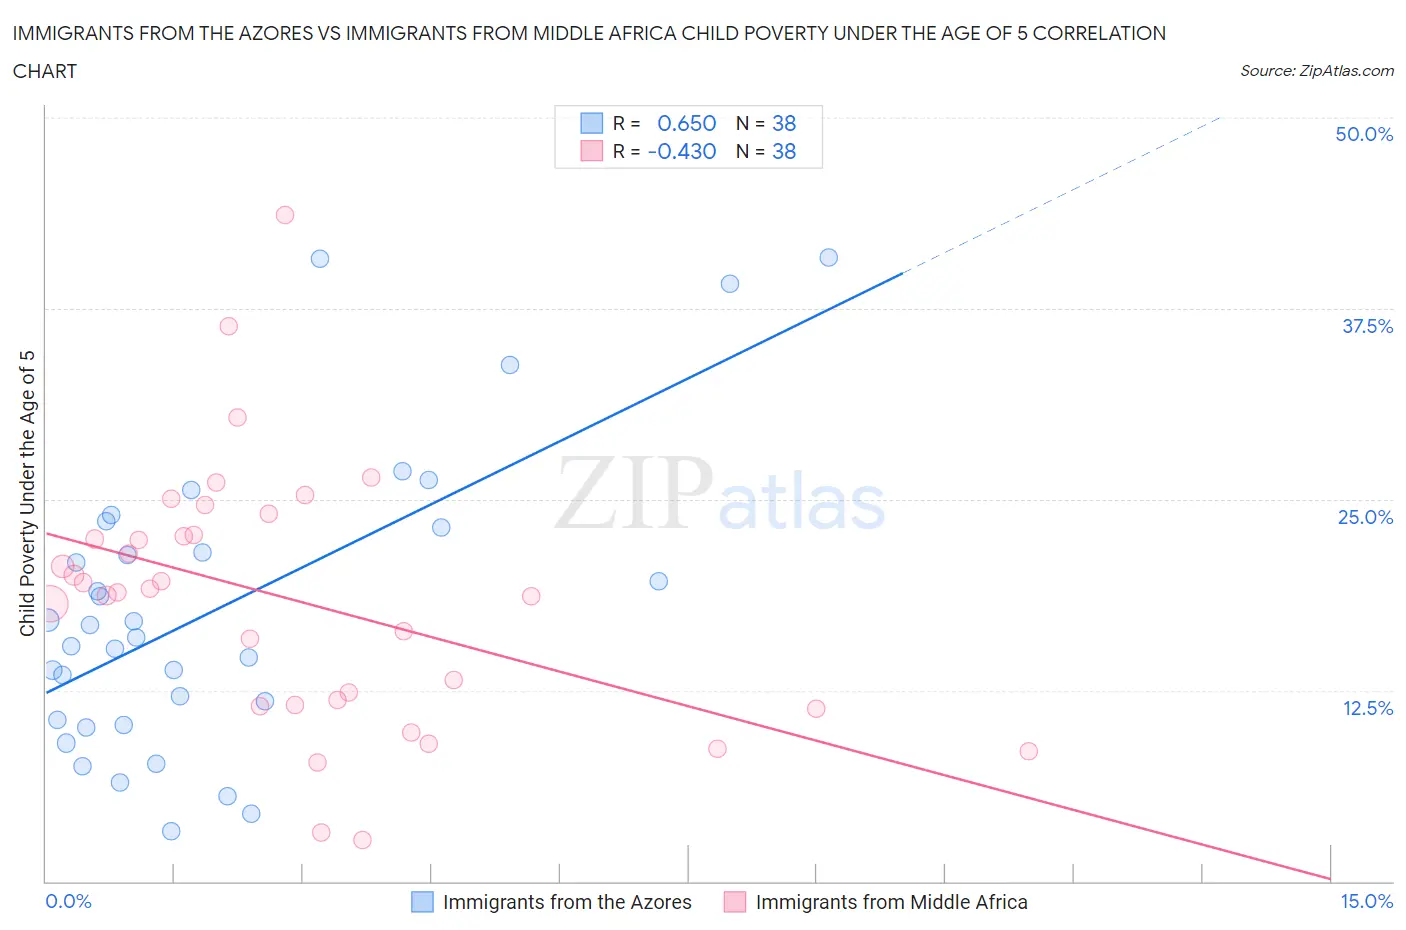 Immigrants from the Azores vs Immigrants from Middle Africa Child Poverty Under the Age of 5